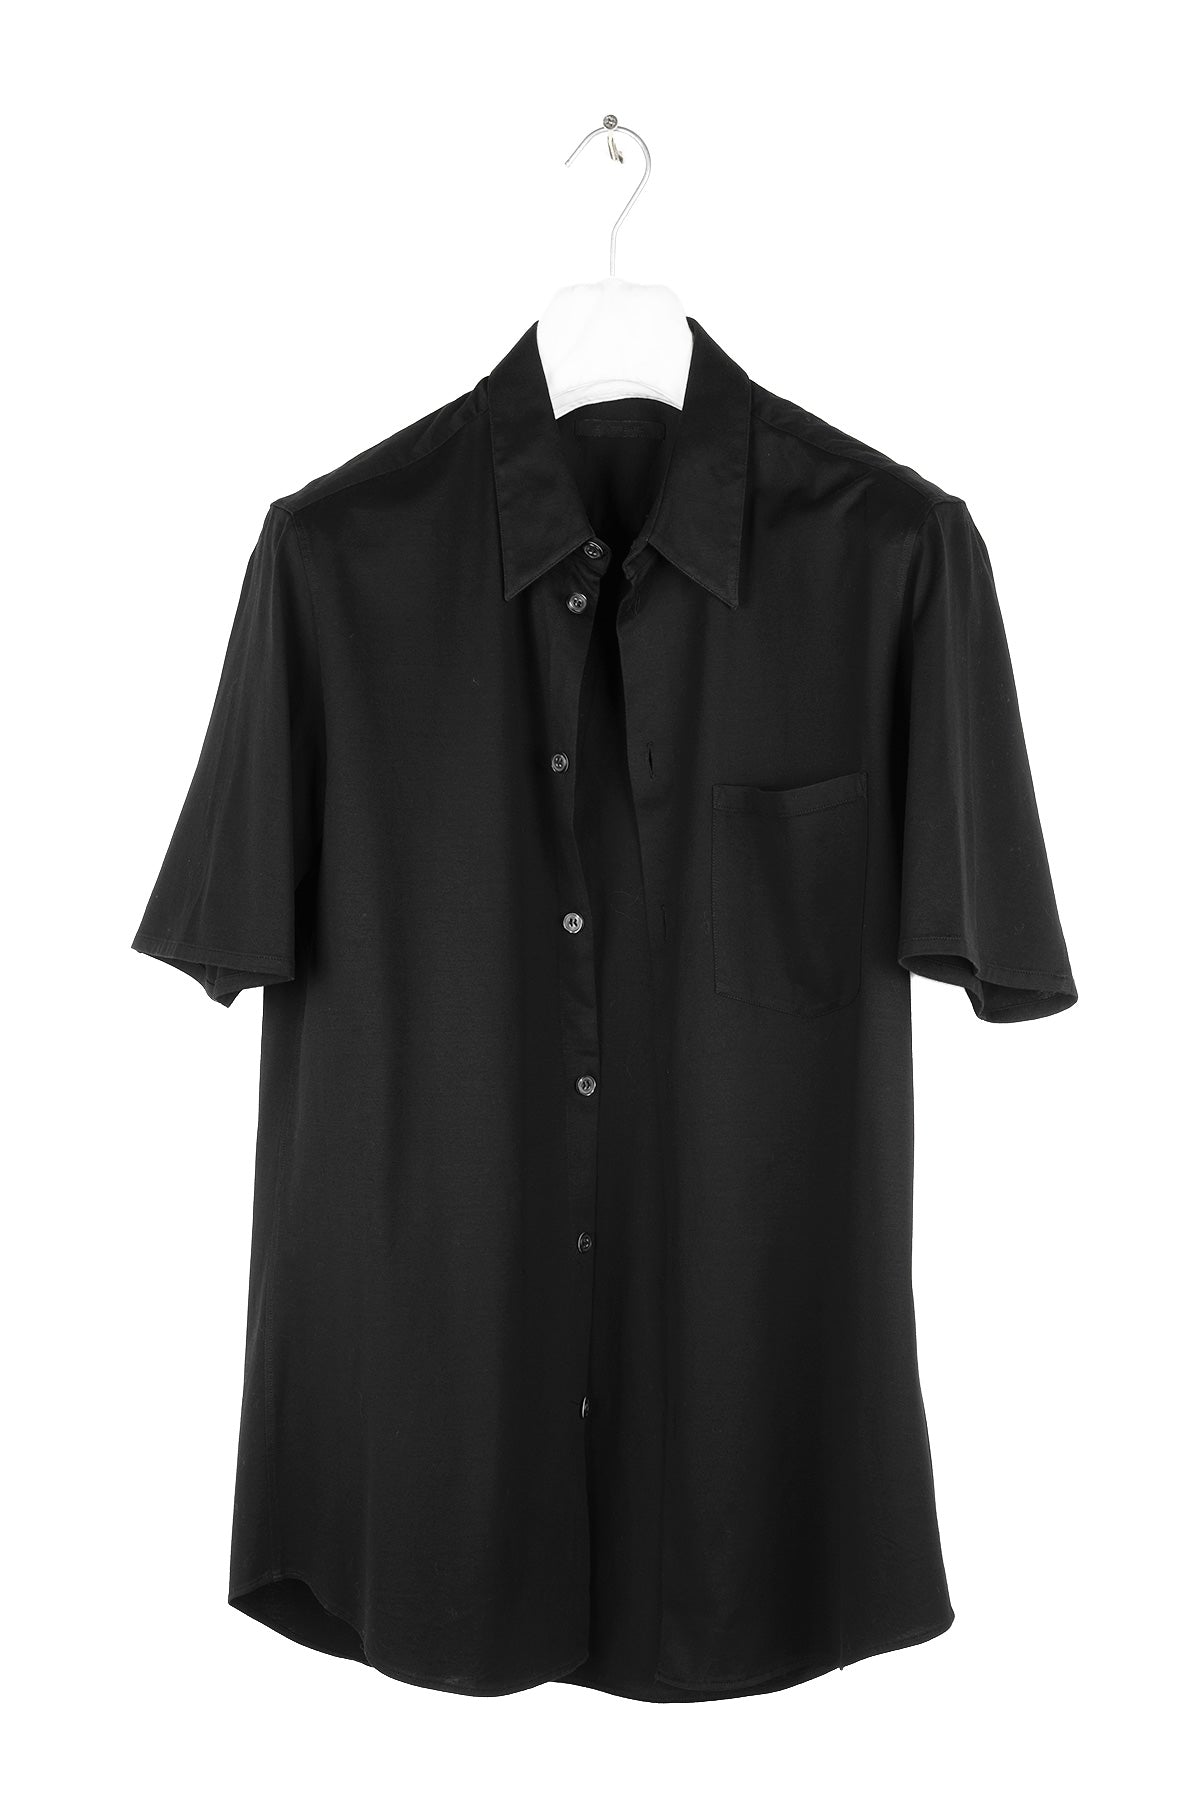 2001 S/S SHORT-SLEEVE SHIRT IN JERSEY EGYPTIAN COTTON